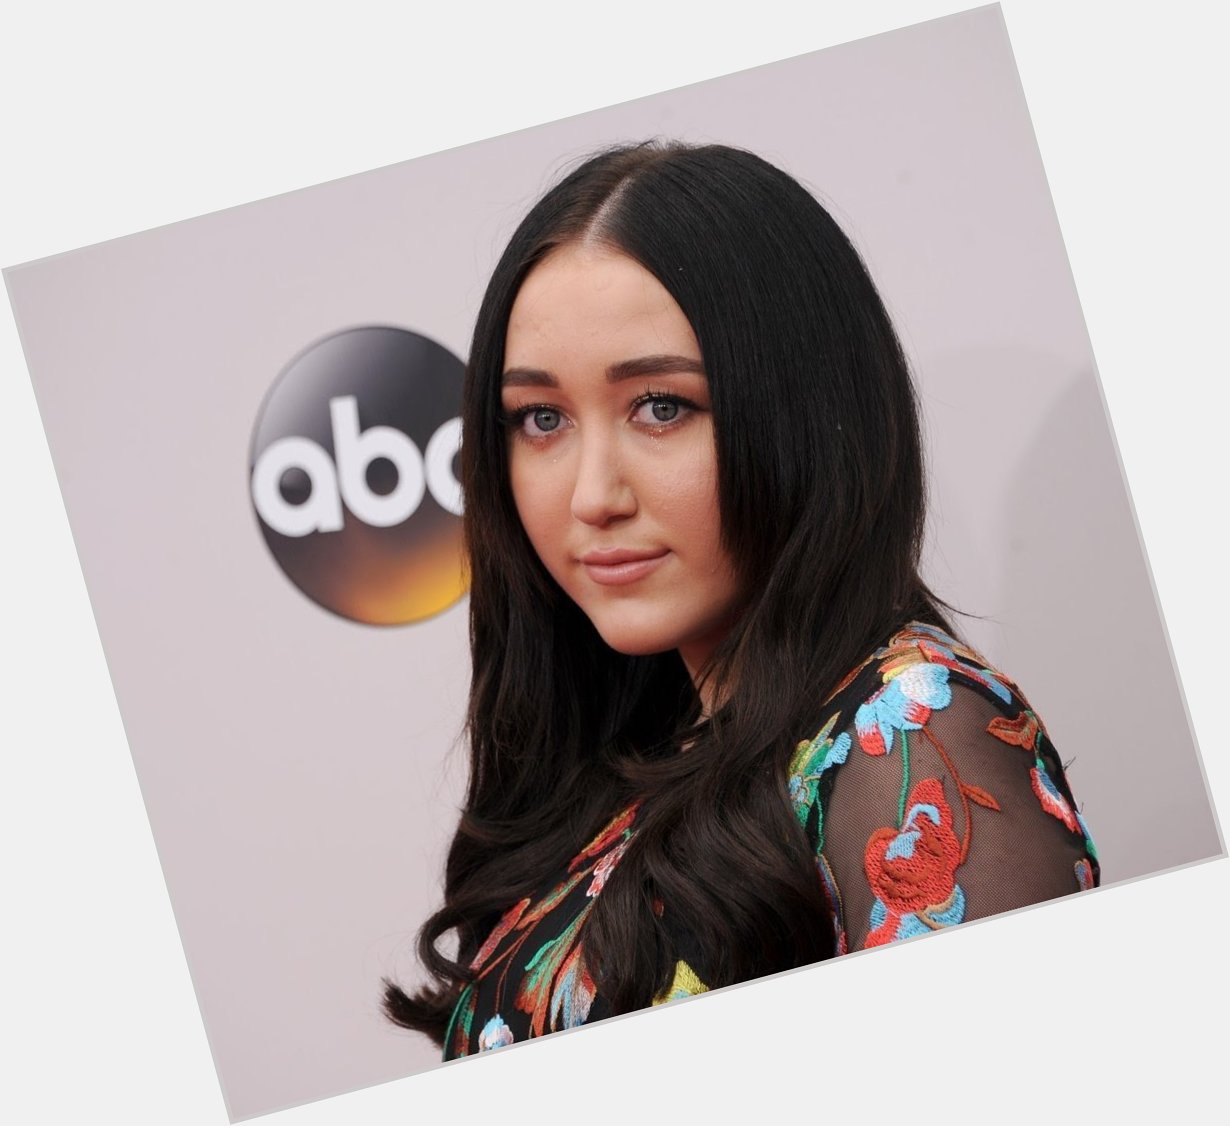 Happy 17th birthday noah cyrus
hope you are having great opportunity in the world
luv ya! 